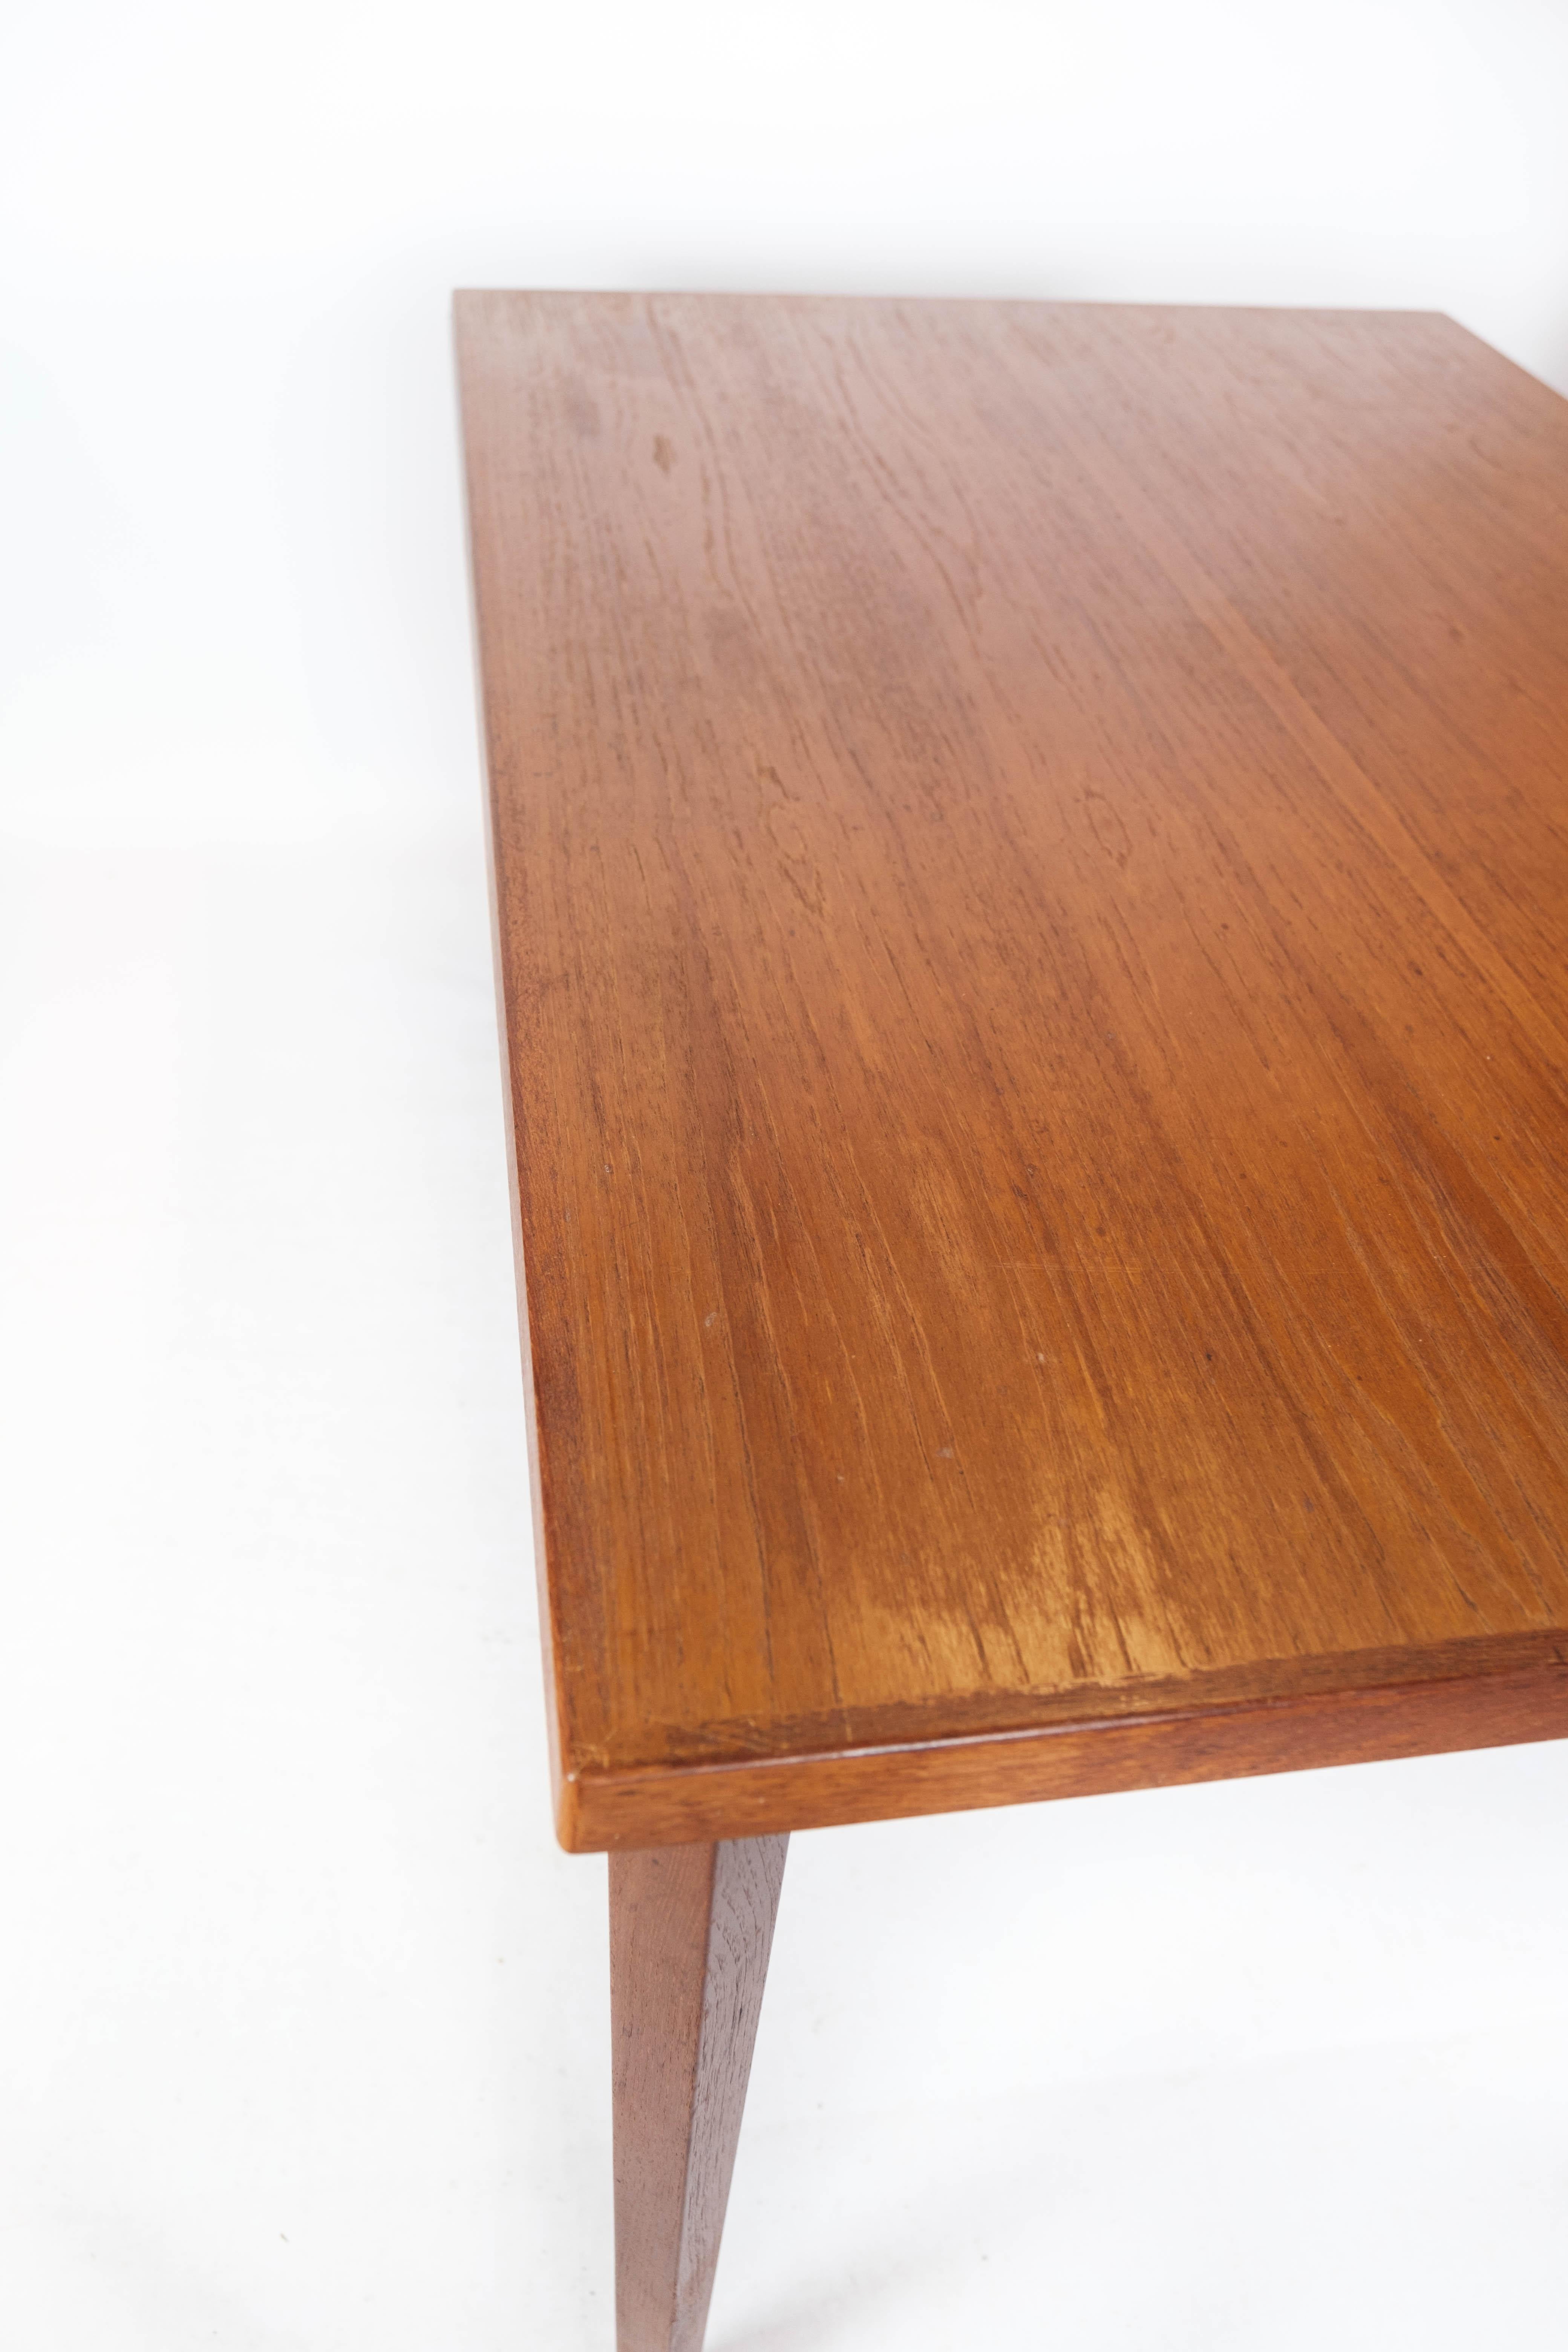 Dining Table in Teak with Extension Plates, of Danish Design from the 1960s For Sale 5